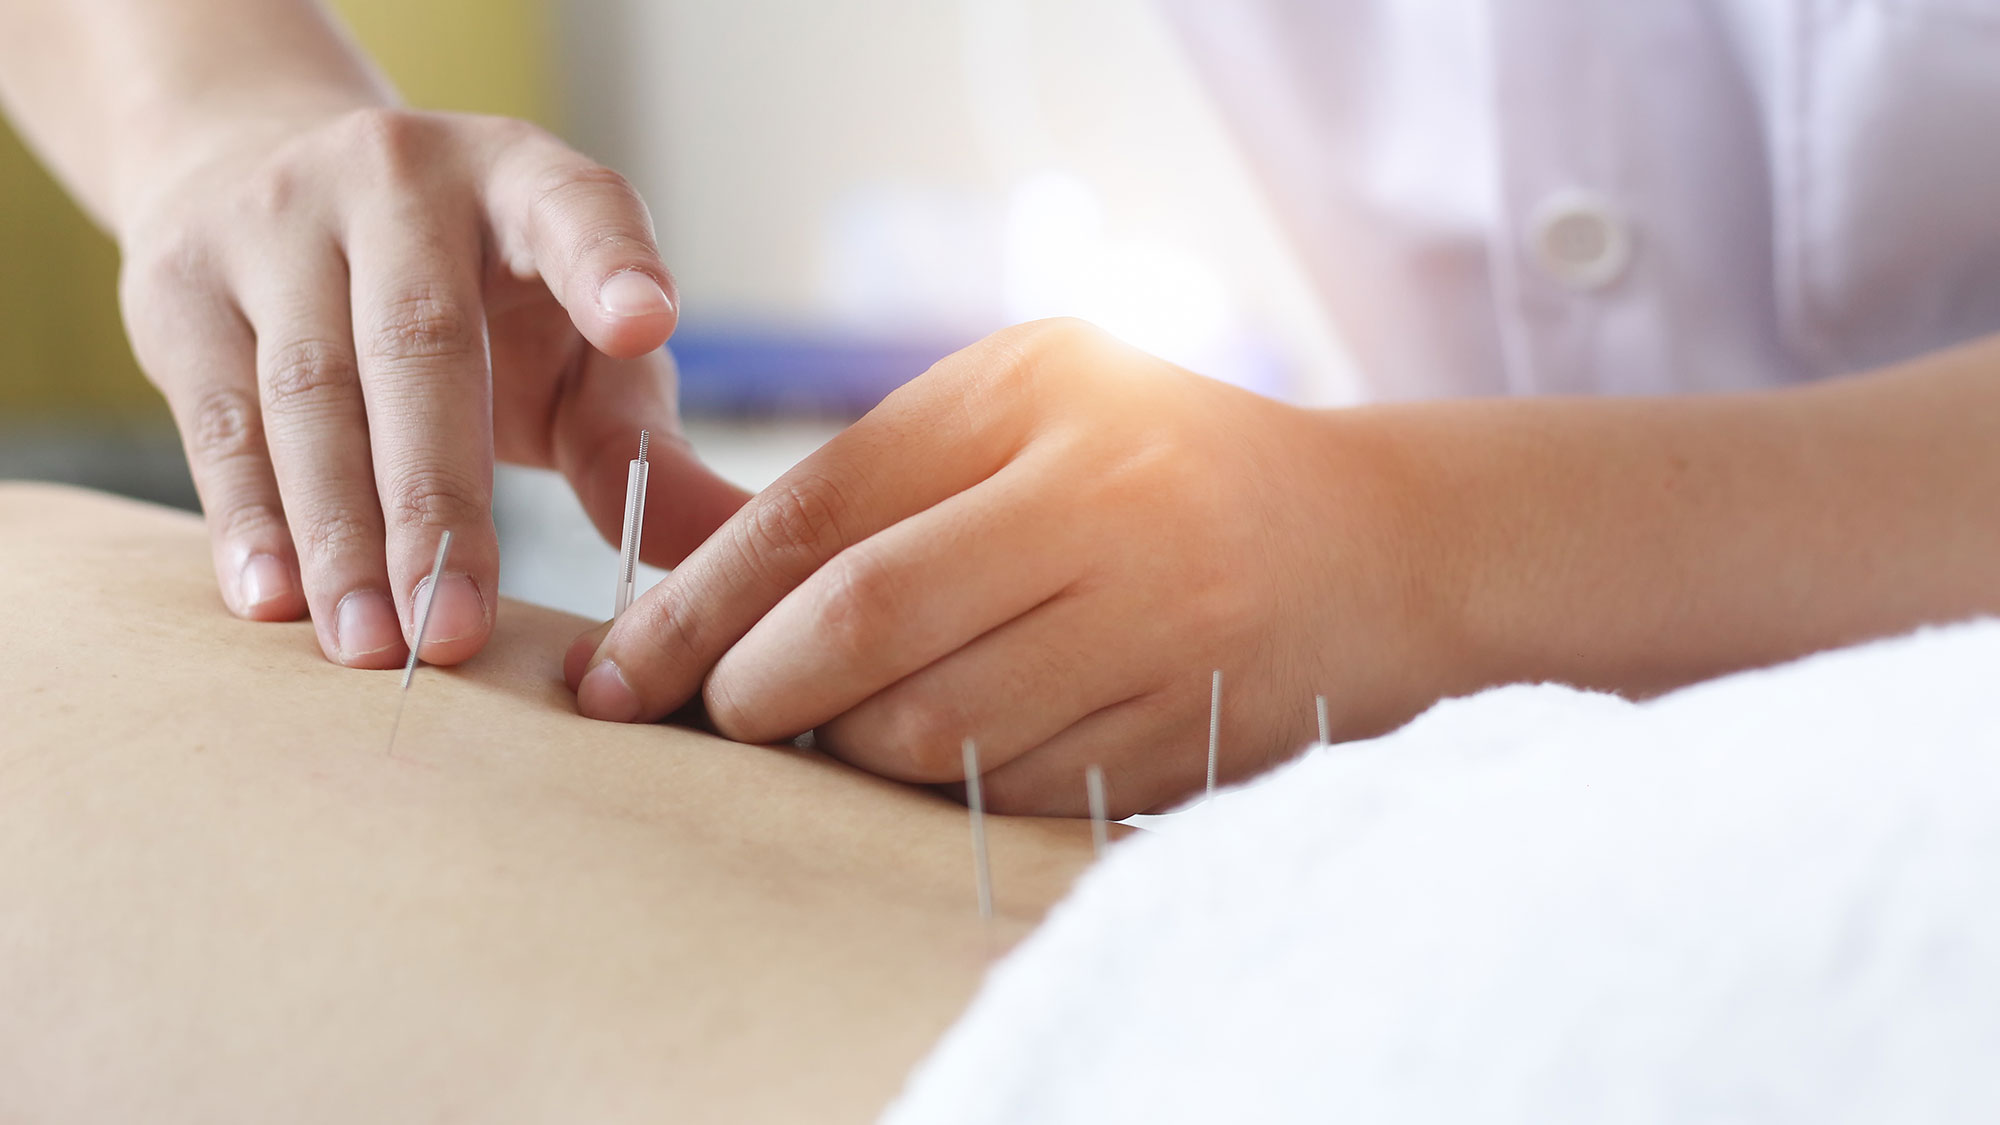 medicare-might-cover-acupuncture-treatments-for-lower-back-pain